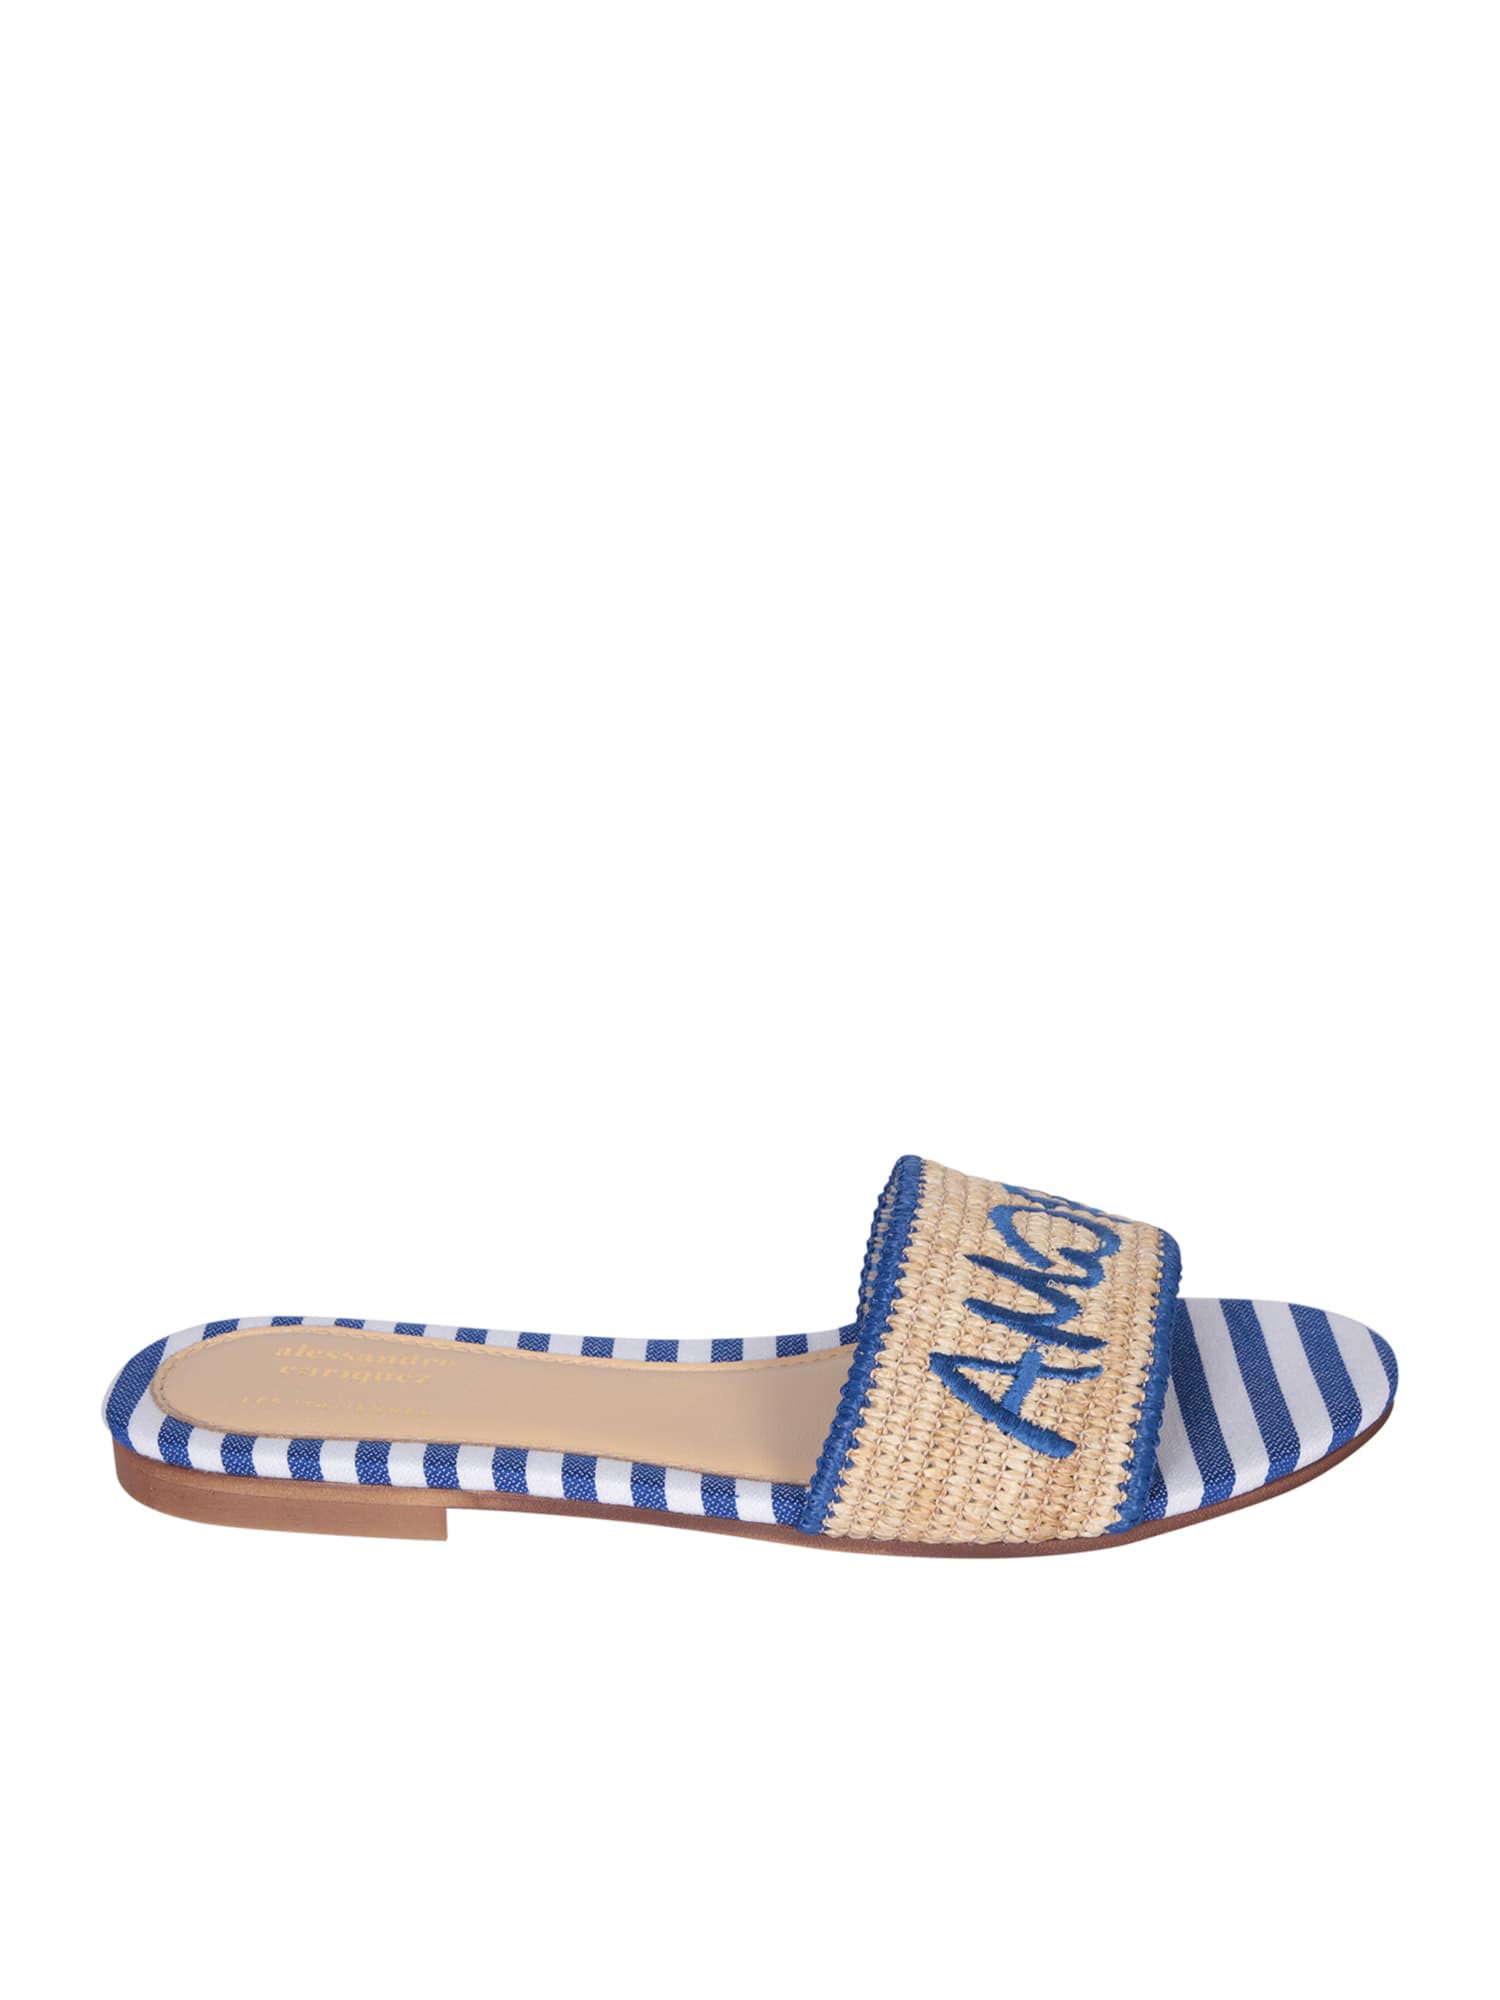 Alessandro Enriquez Amore Bei Blu Raffia And Fabric Sandals In Neutral